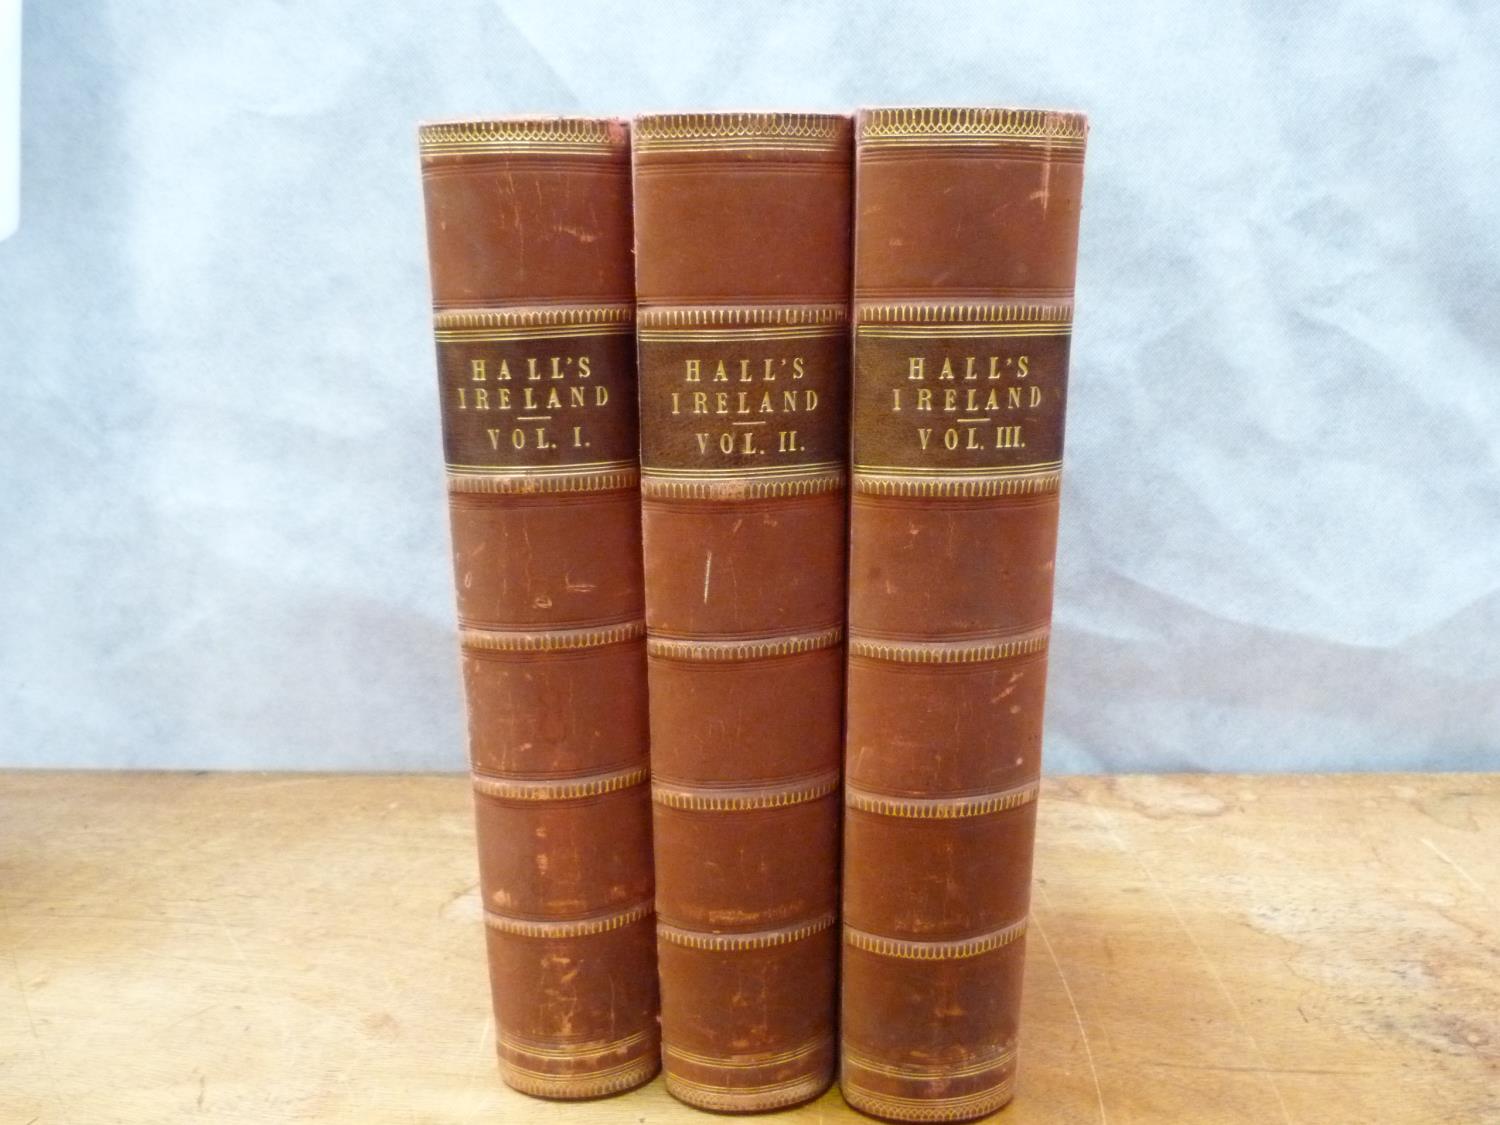 HALL MR & MRS S. C.  Ireland, Its Scenery, Character, etc. 3 vols. Many eng. plates, text illus. & - Image 3 of 3